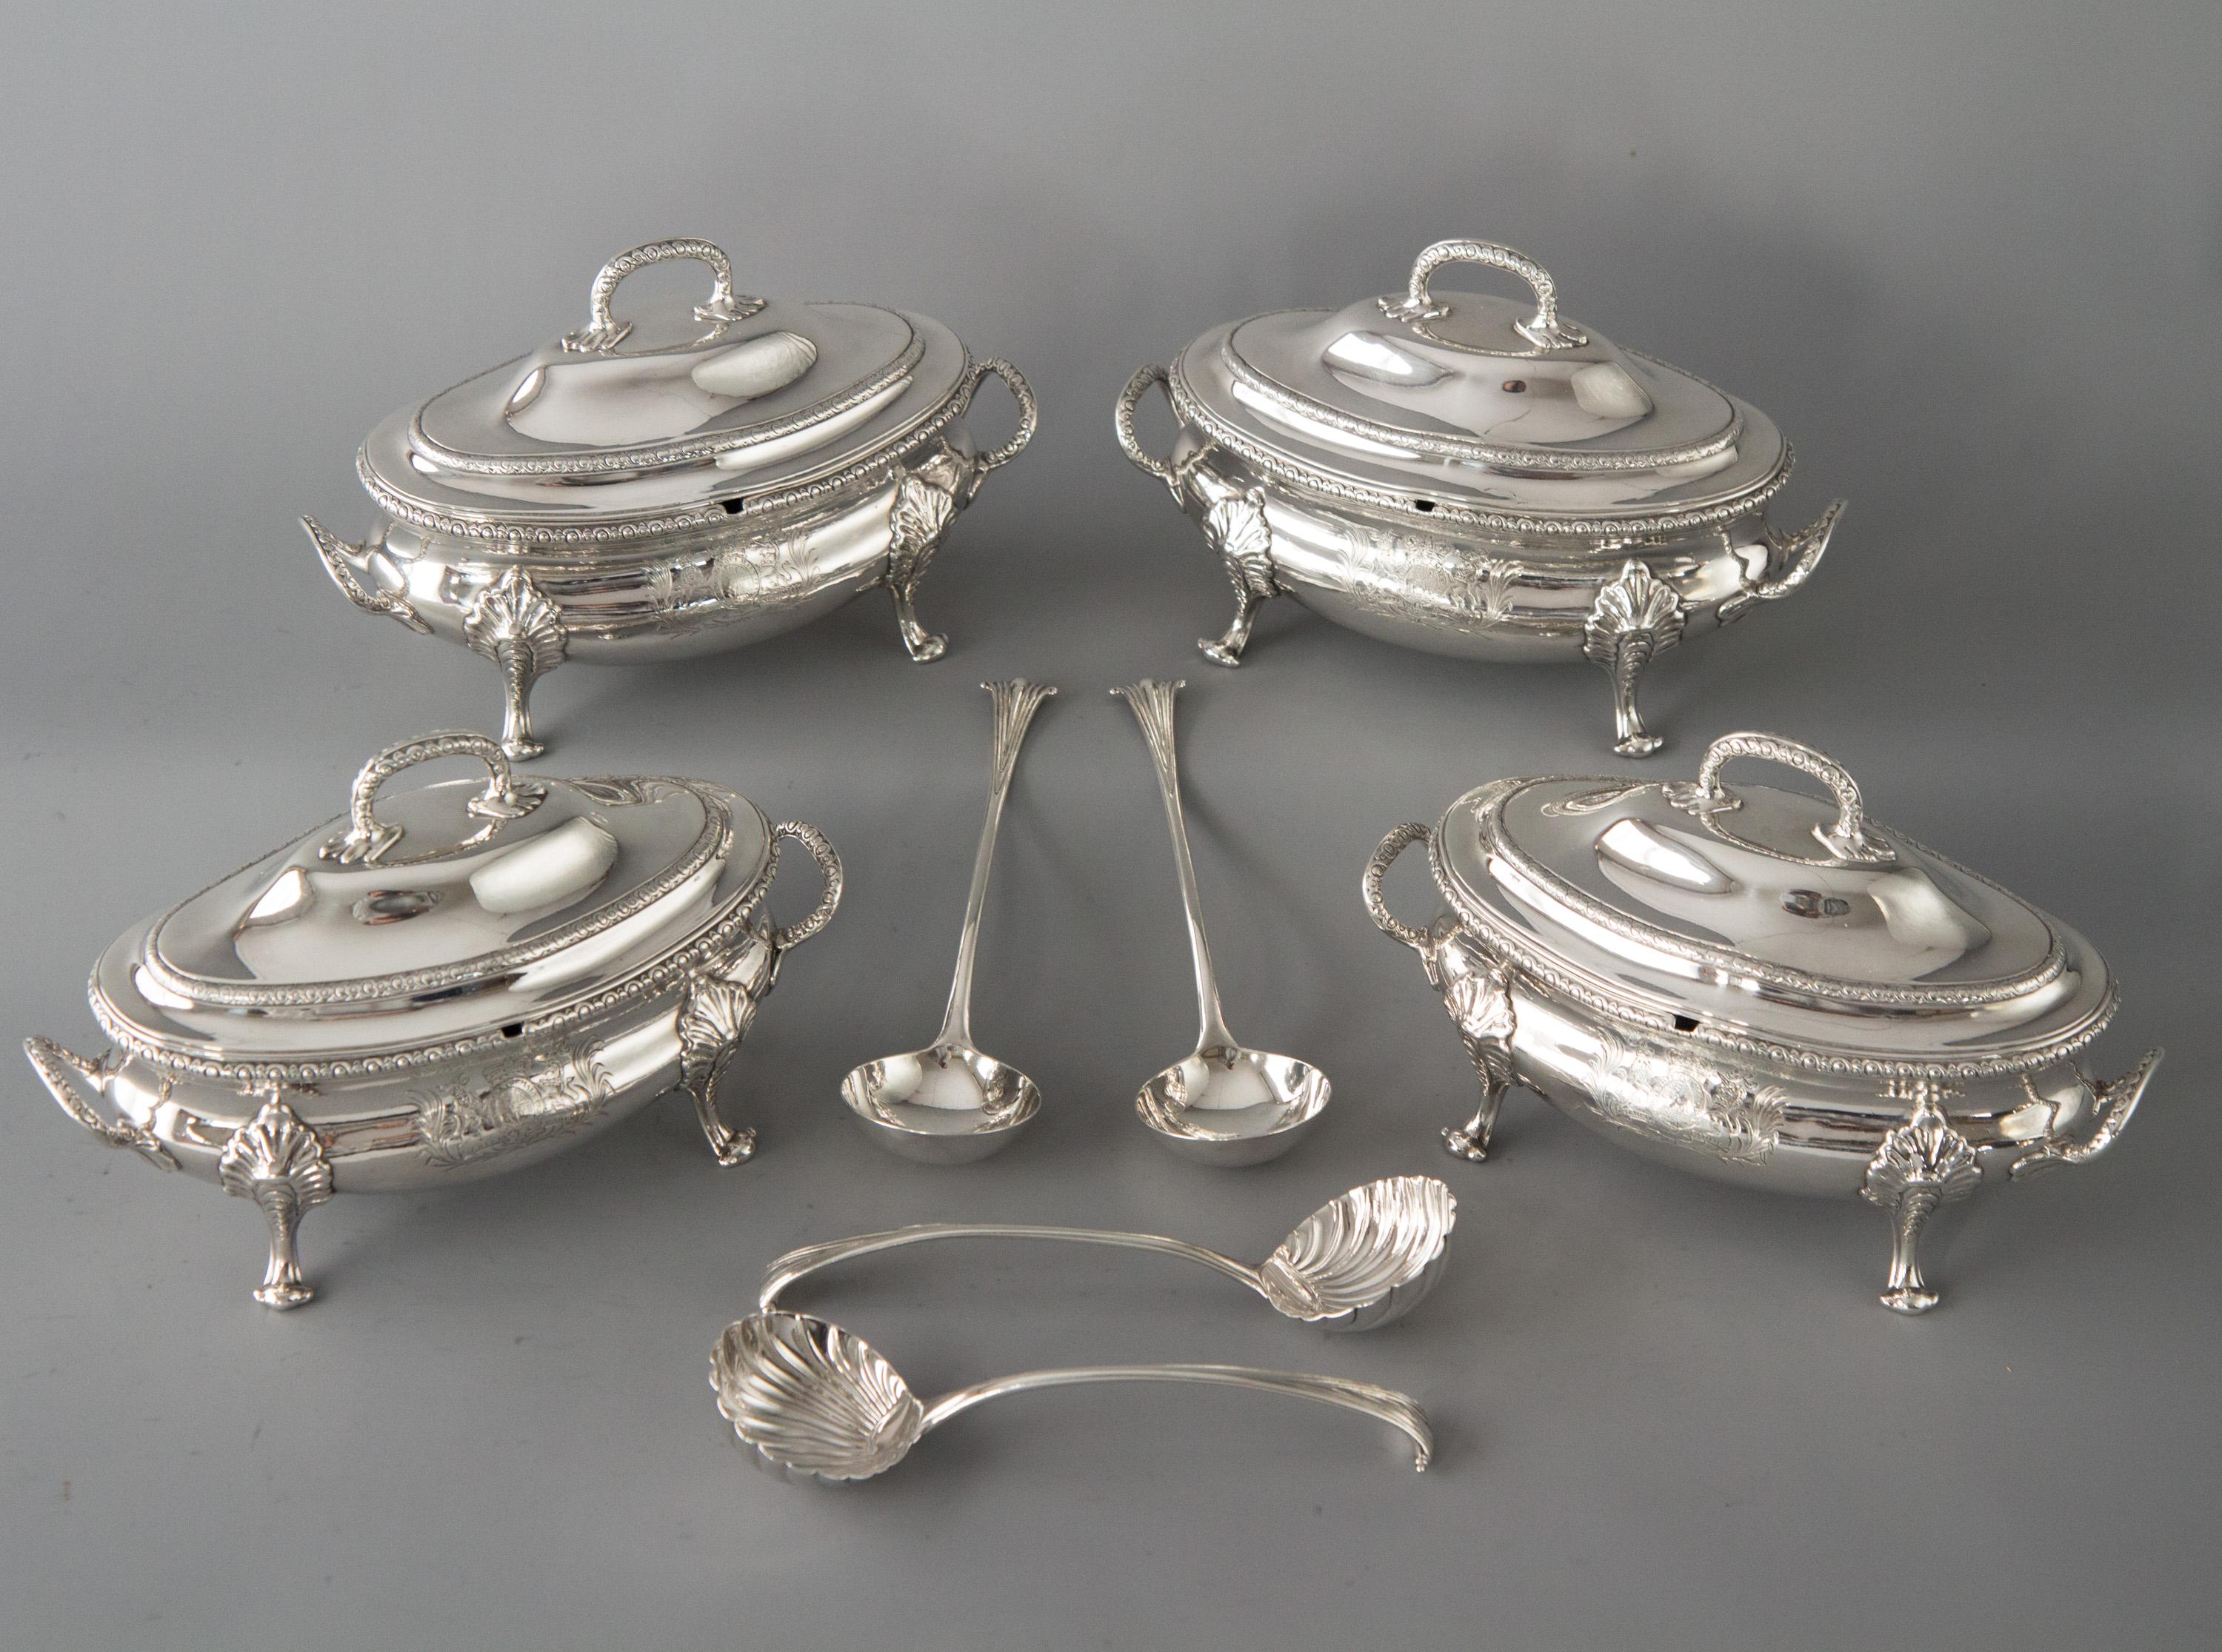 An exqusite set of four George III silver oval two handled oval sauce tureens and covers. Of Oval bombe form on four rocaille capped scroll feet, with ovolo cast borders and handles.

Engraved to one side with Queen Anne's Royal coat of arms and